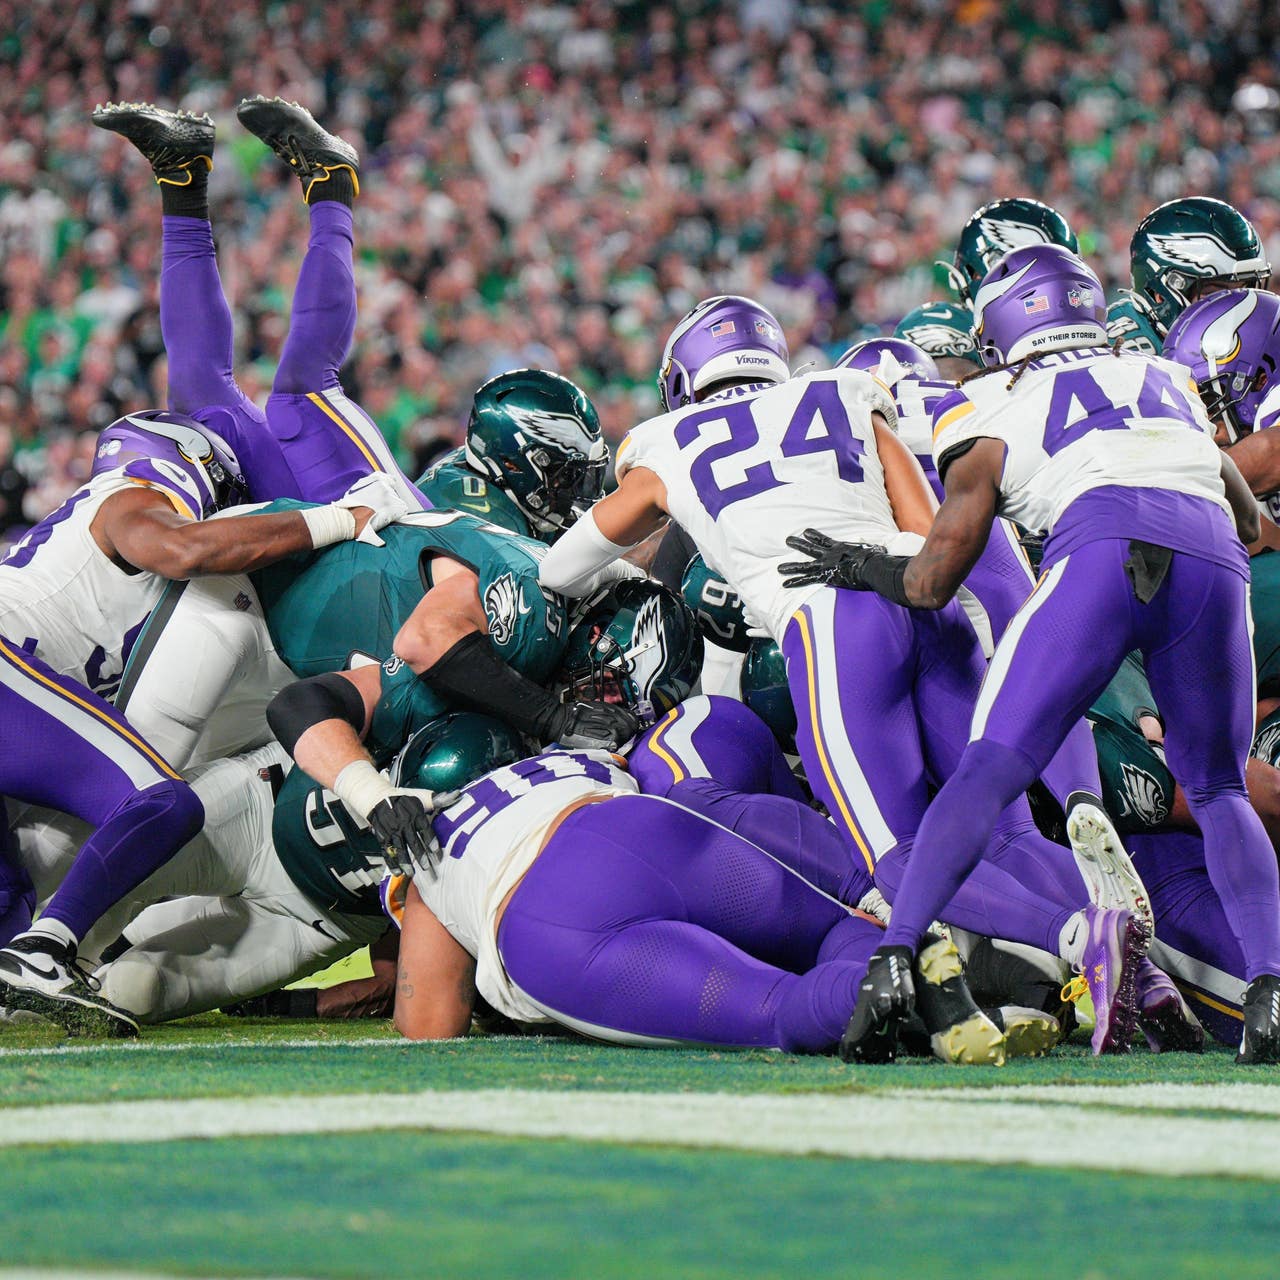 Should the NFL ban the Eagles' Tush Push? Get a grip.